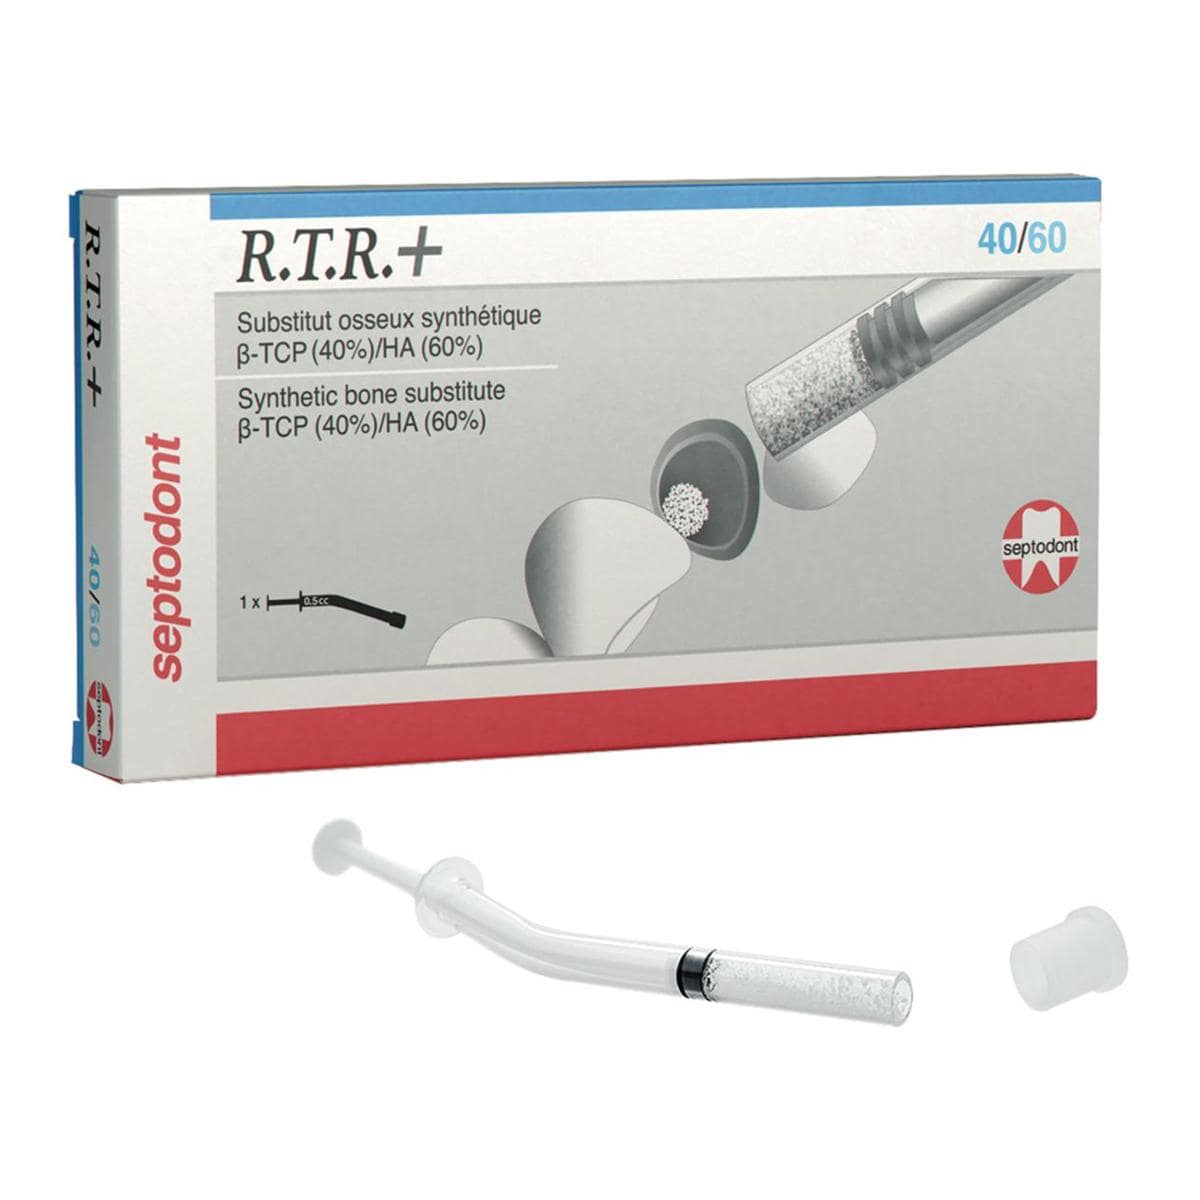 RTR+ 40/60 Synthetic Bone Substitute